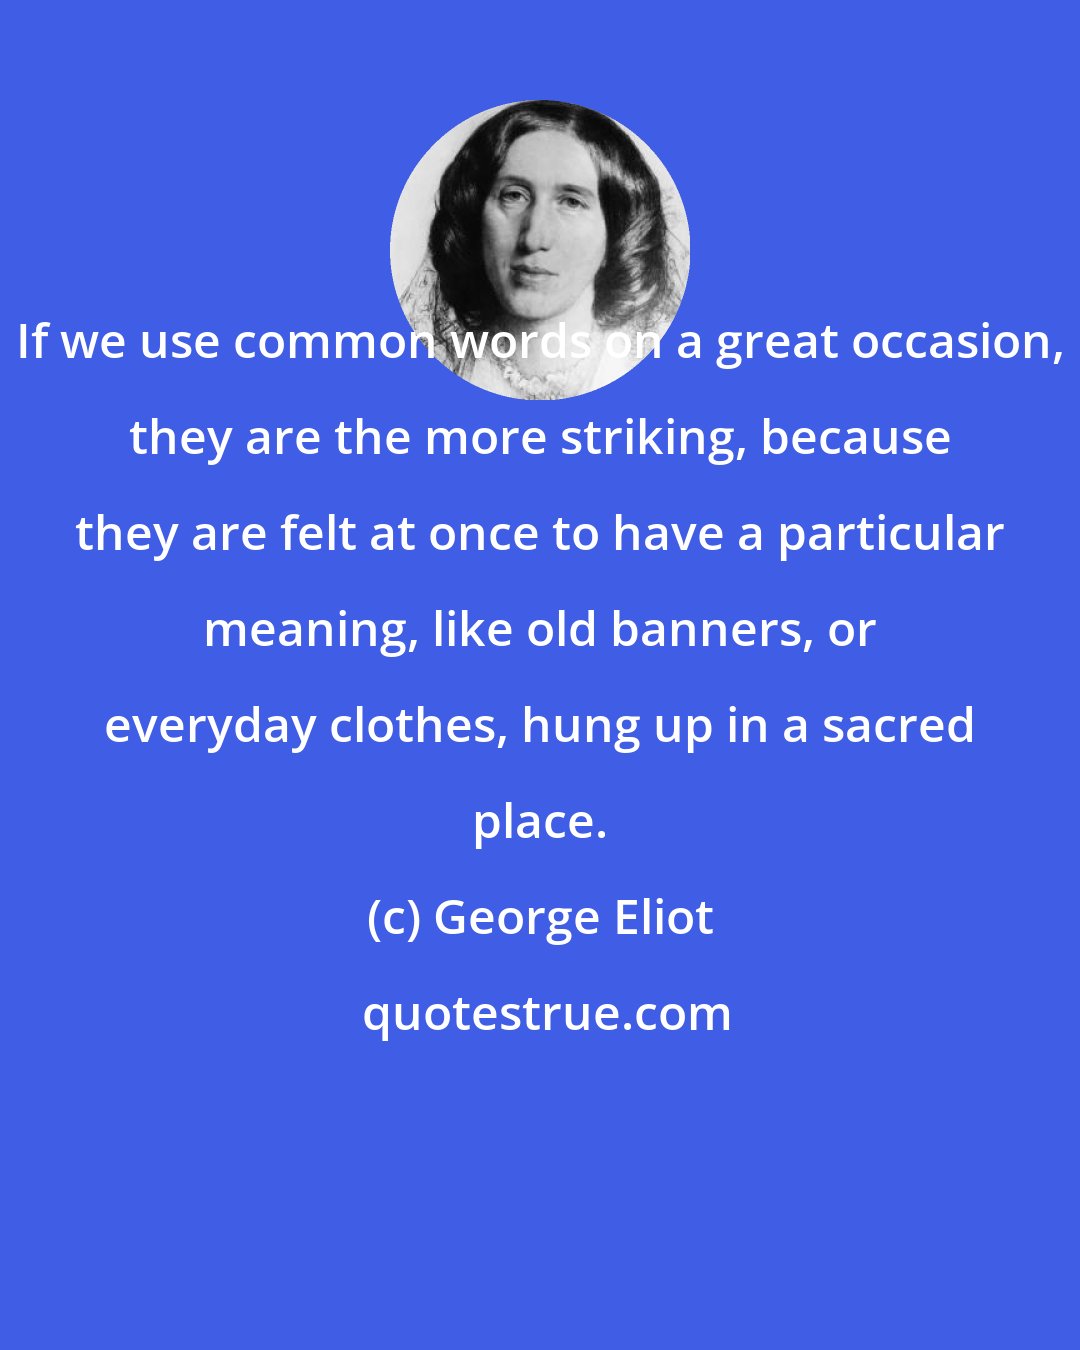 George Eliot: If we use common words on a great occasion, they are the more striking, because they are felt at once to have a particular meaning, like old banners, or everyday clothes, hung up in a sacred place.